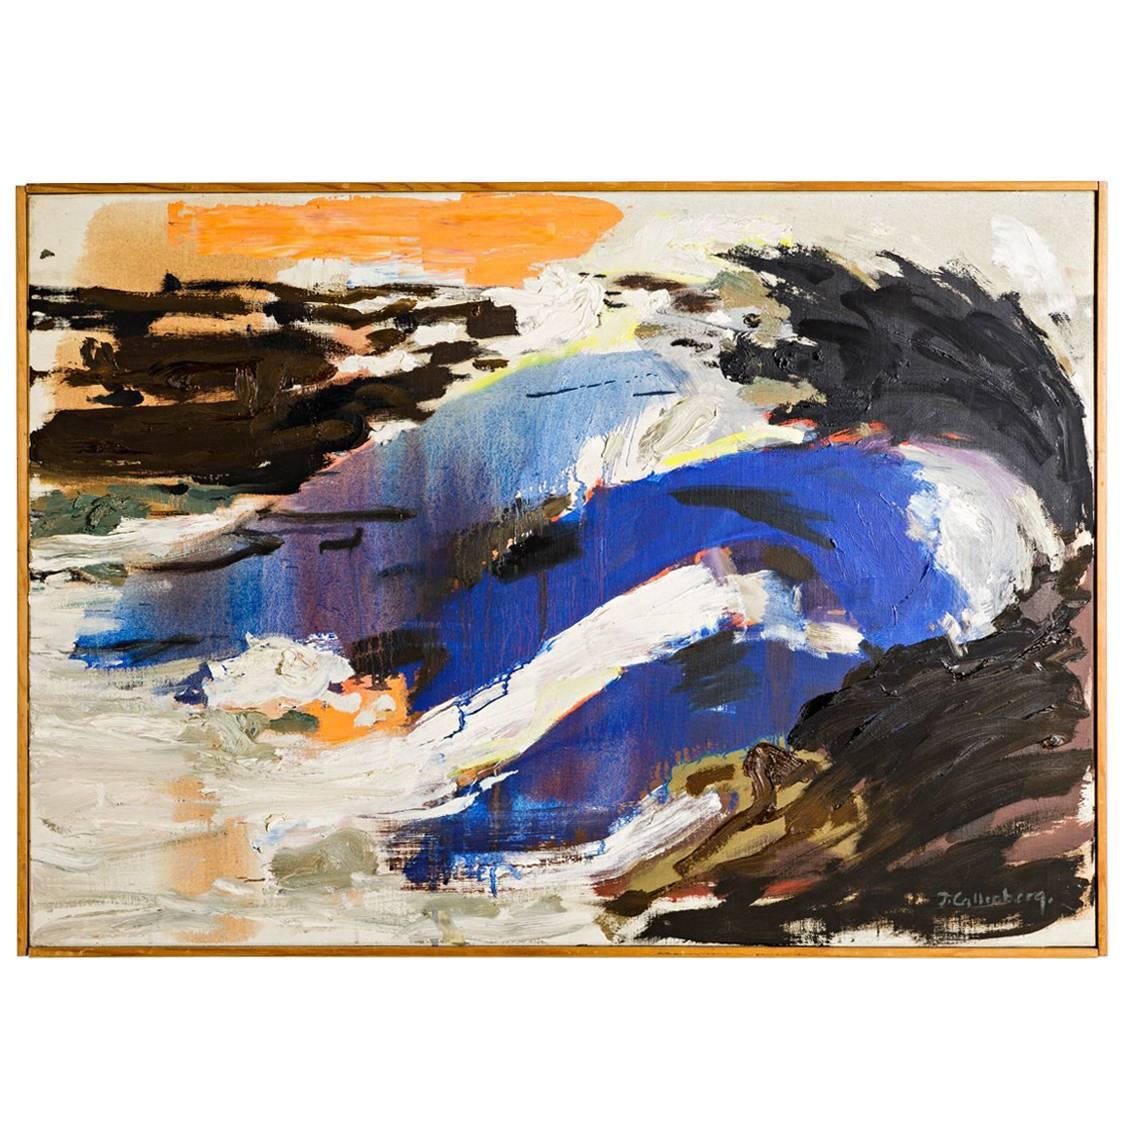 Abstract Painting by Ingemar Callenberg, circa 1970 "Branning"